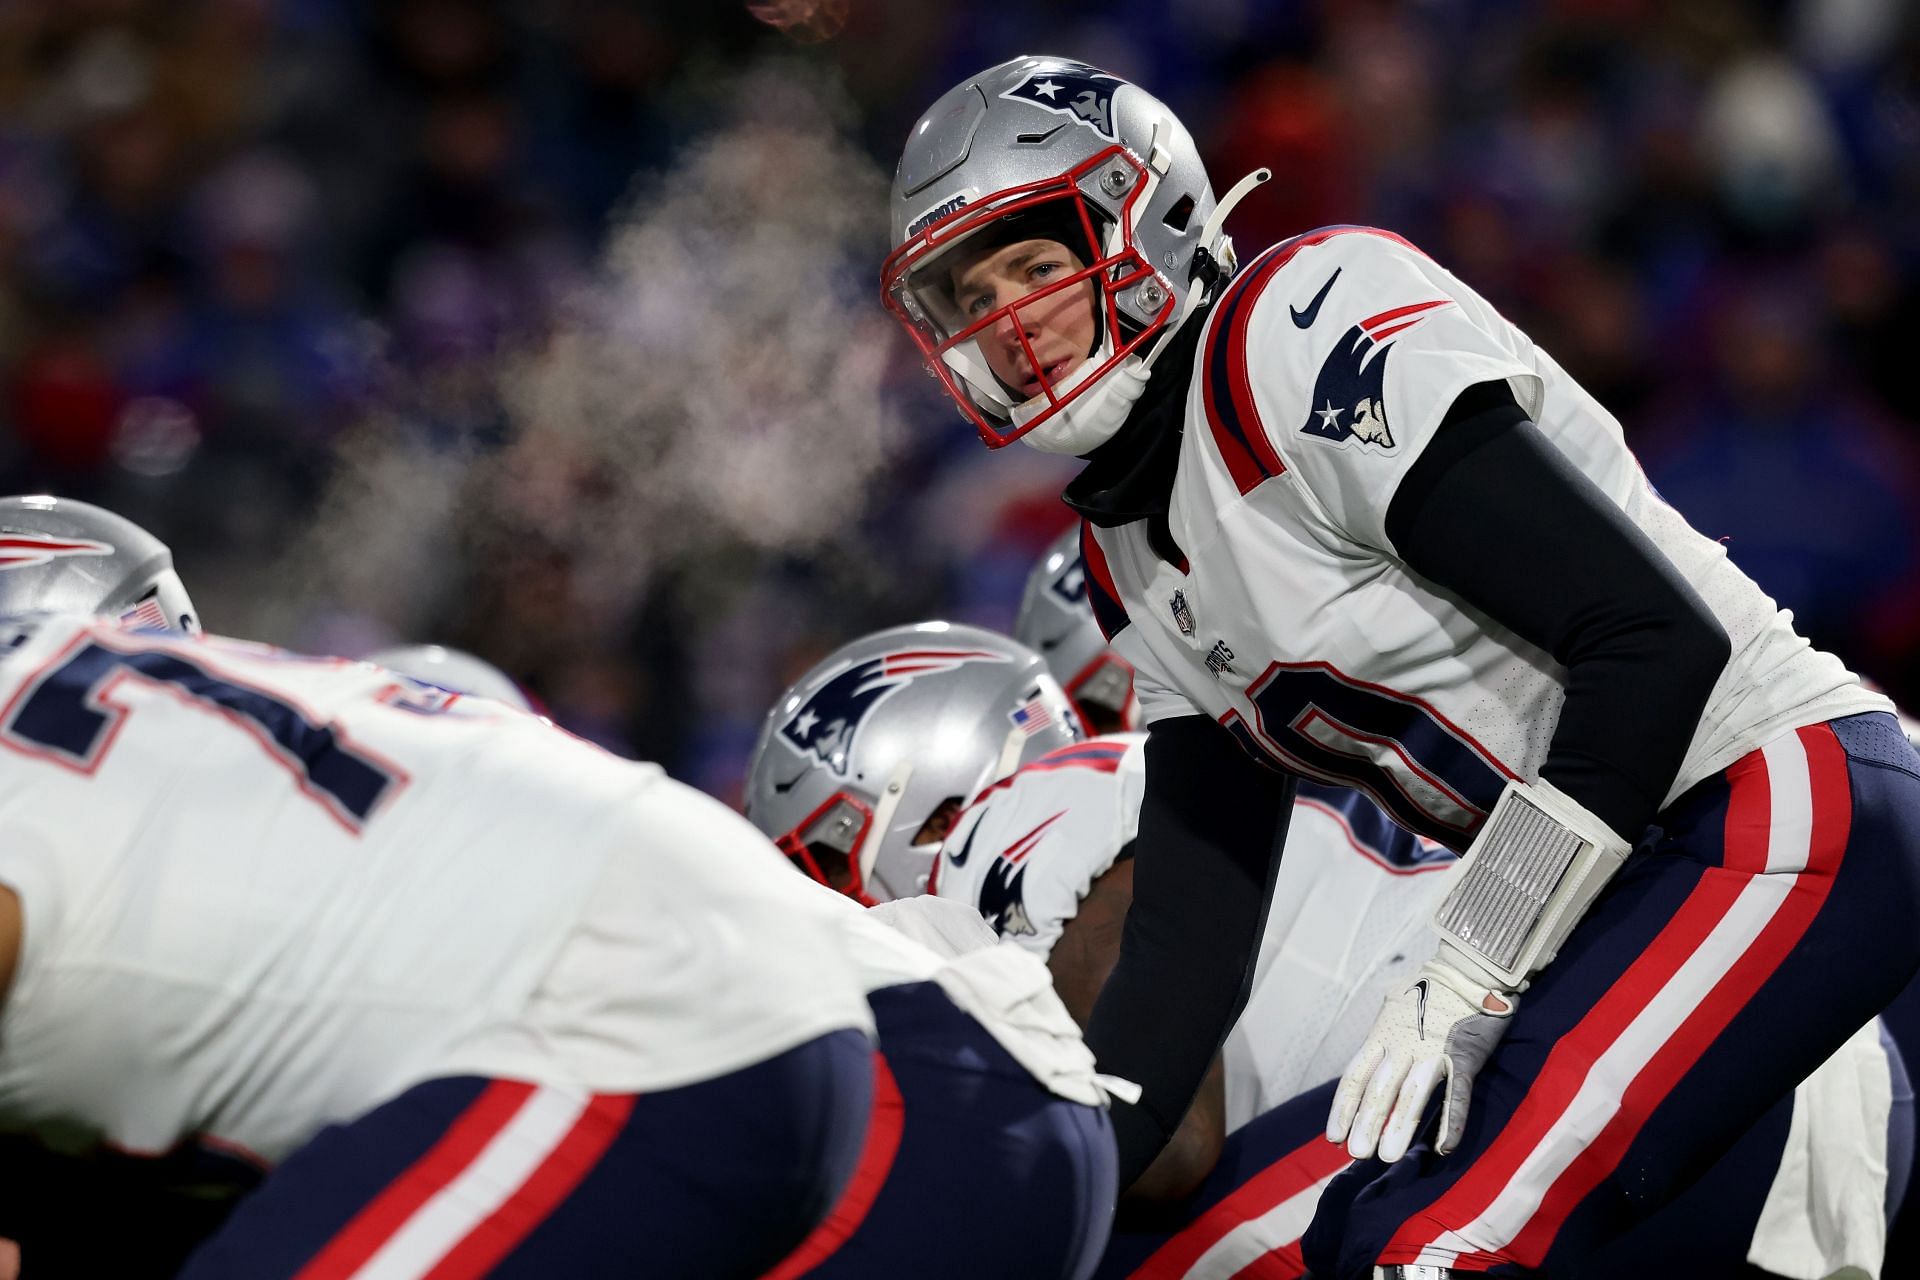 The New England Patriots got surprising contributions from Mac Jones in 2021